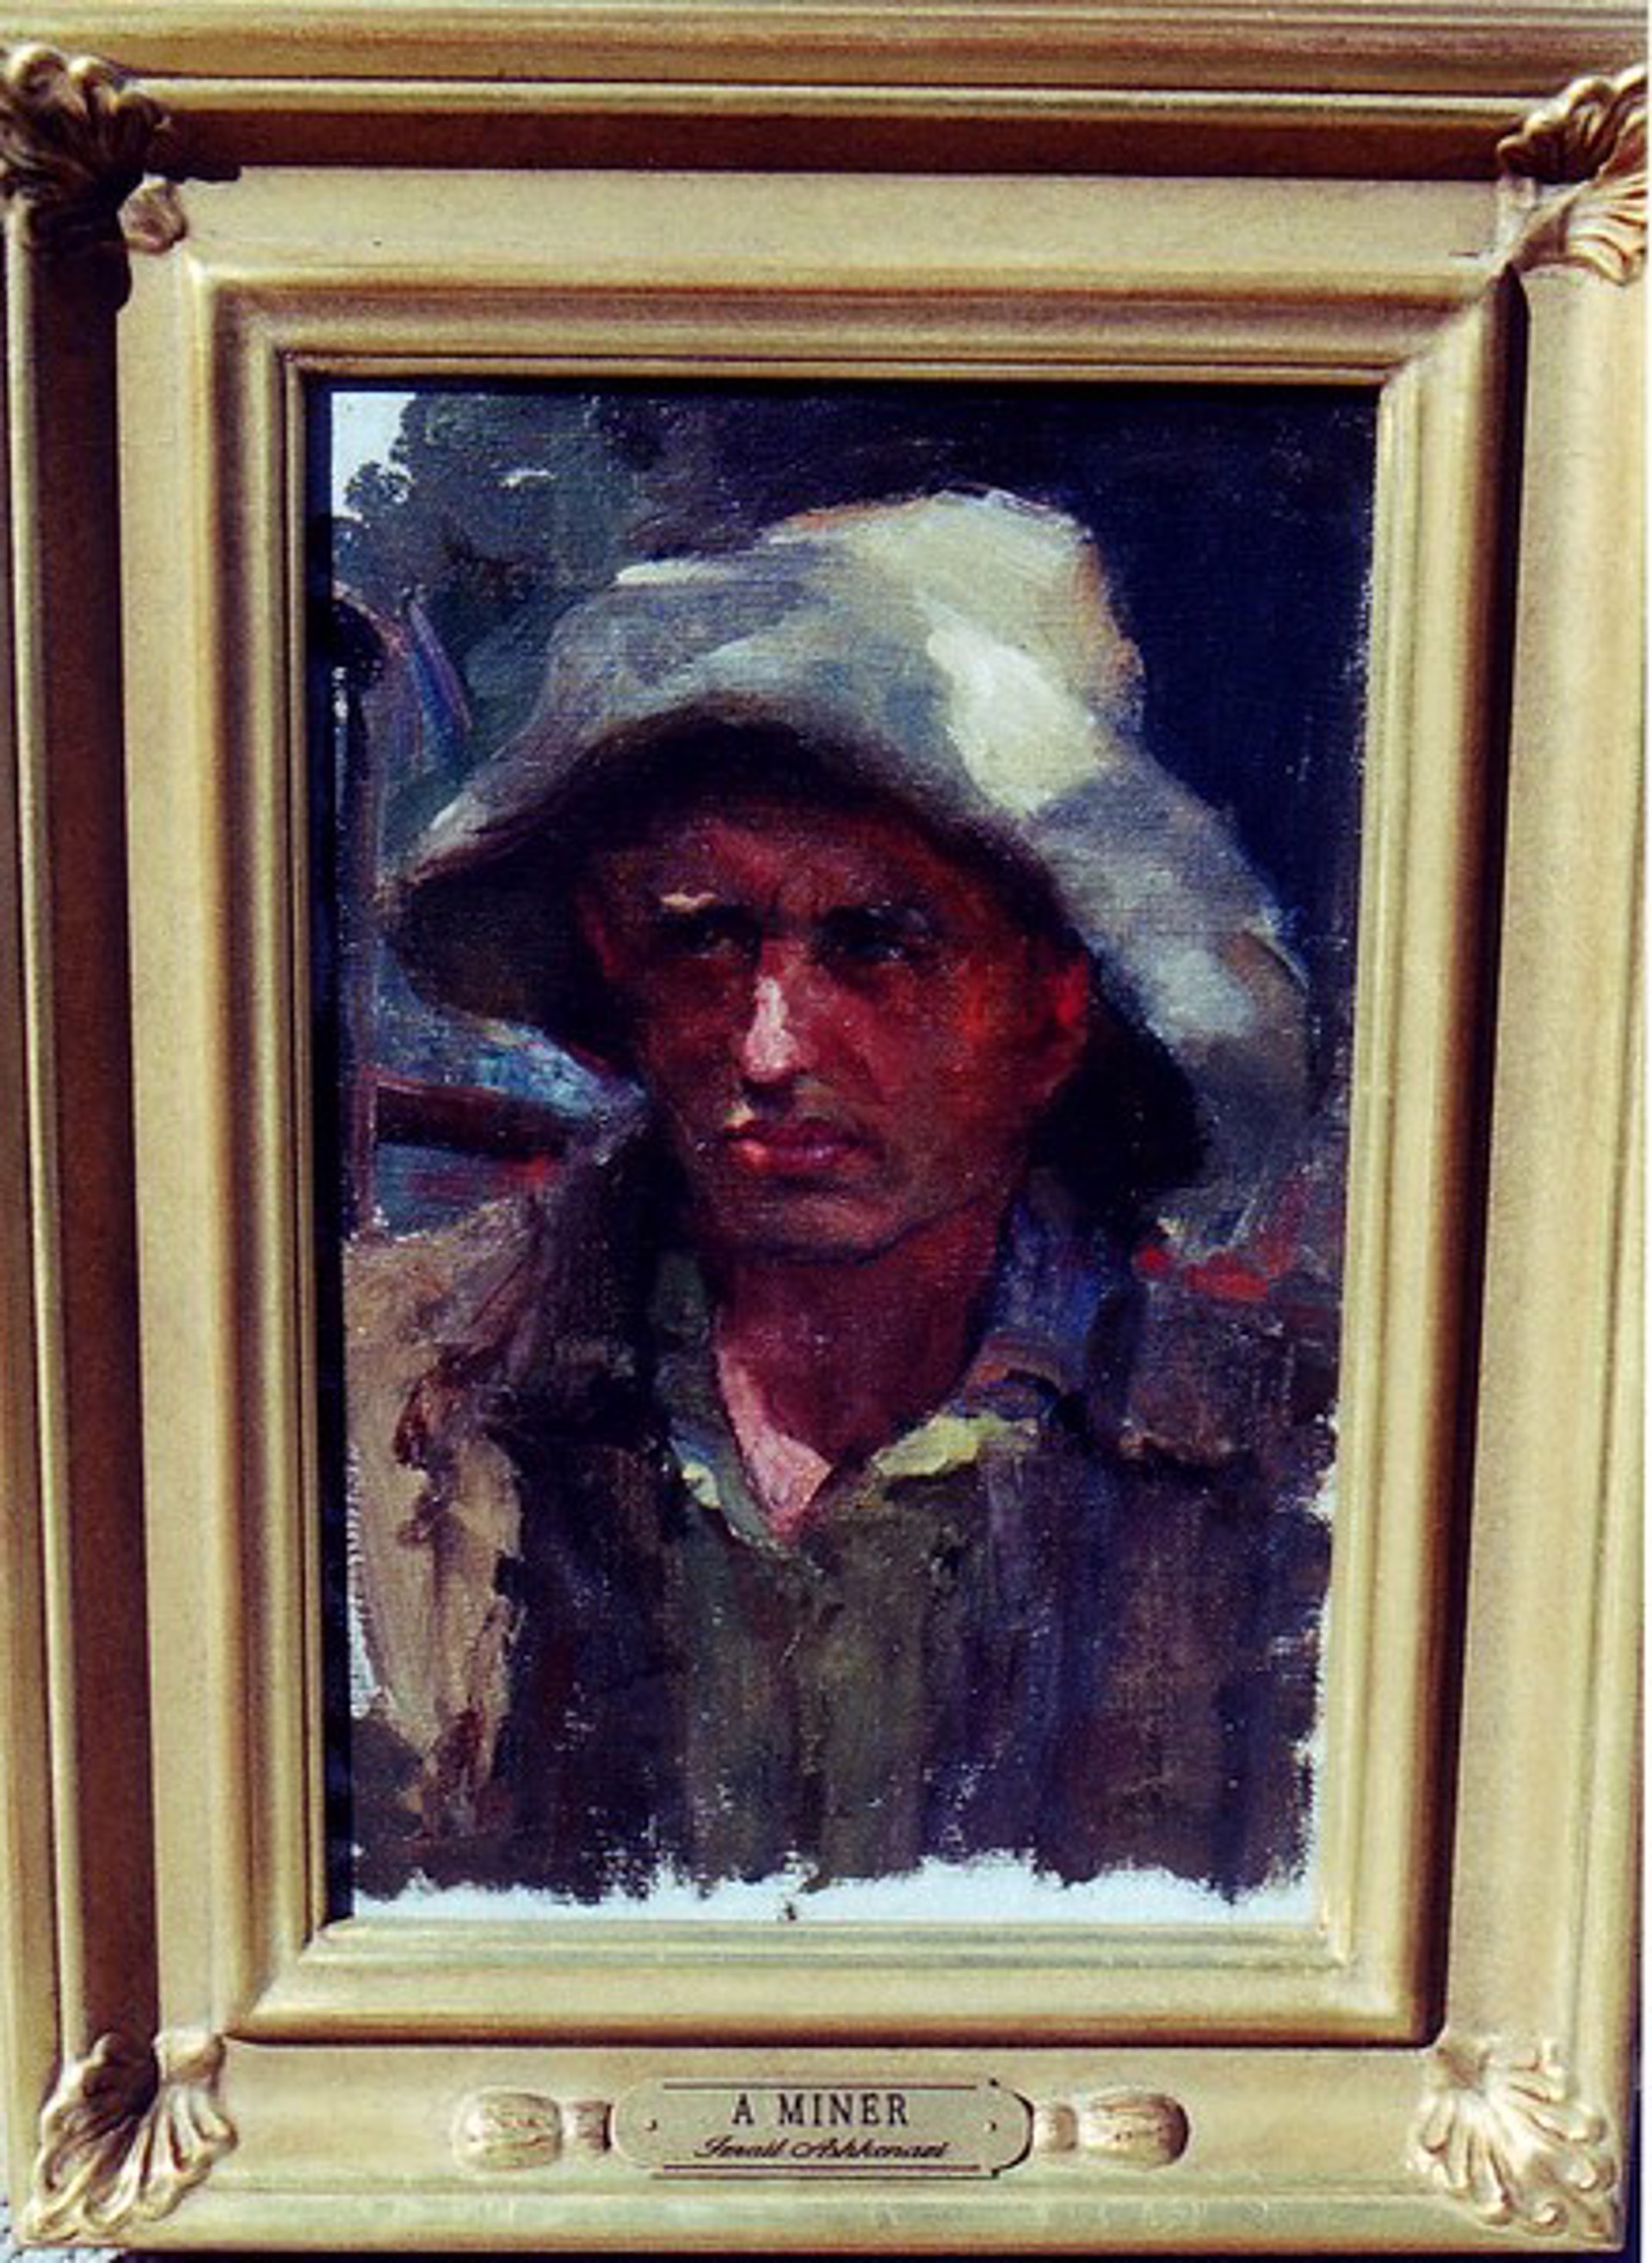 Sketch of a Miner by Izrail Ashkenazi